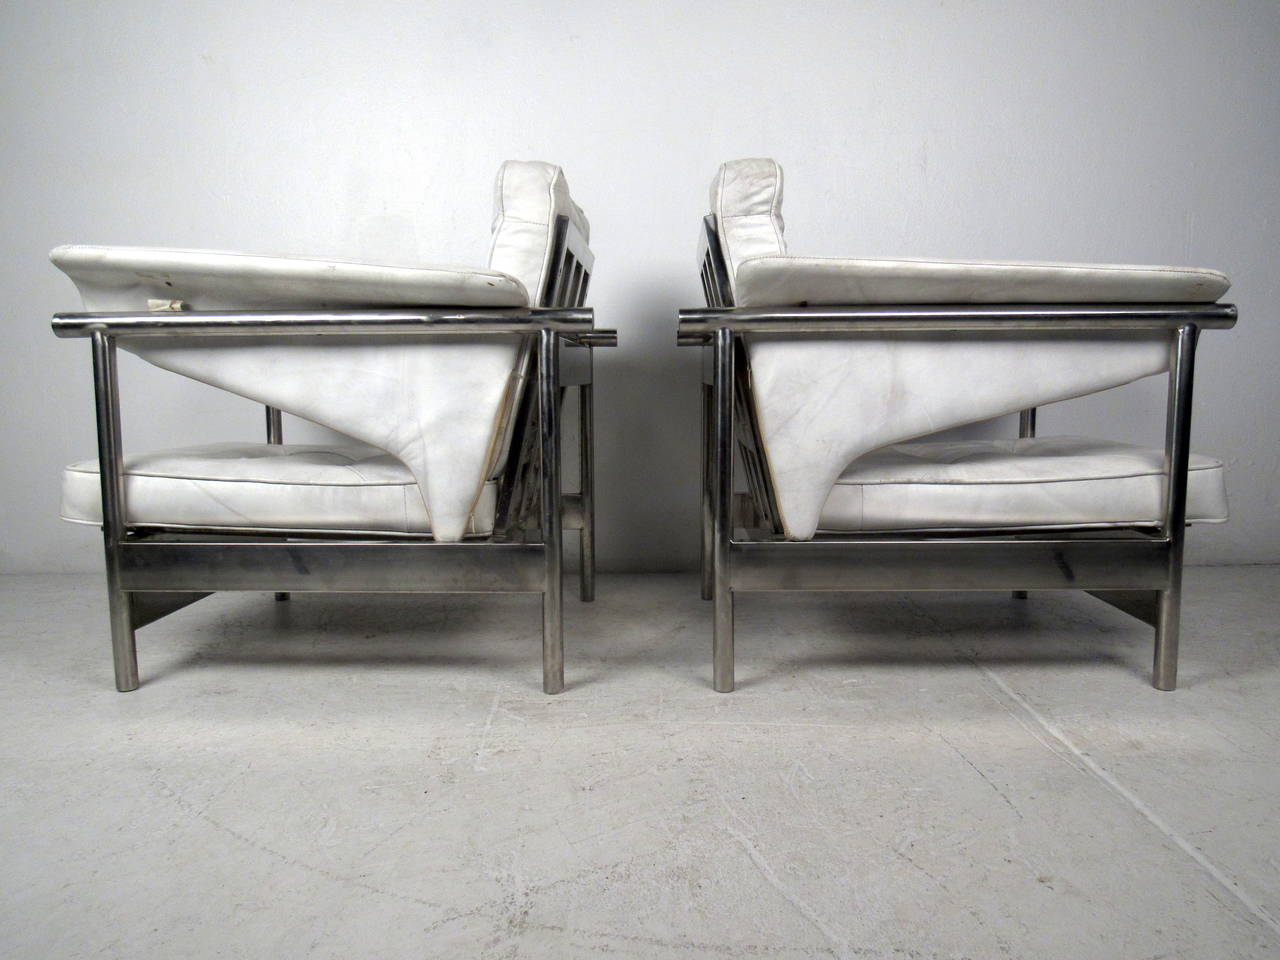 20th Century Midcentury Chrome Lounge Chairs For Sale